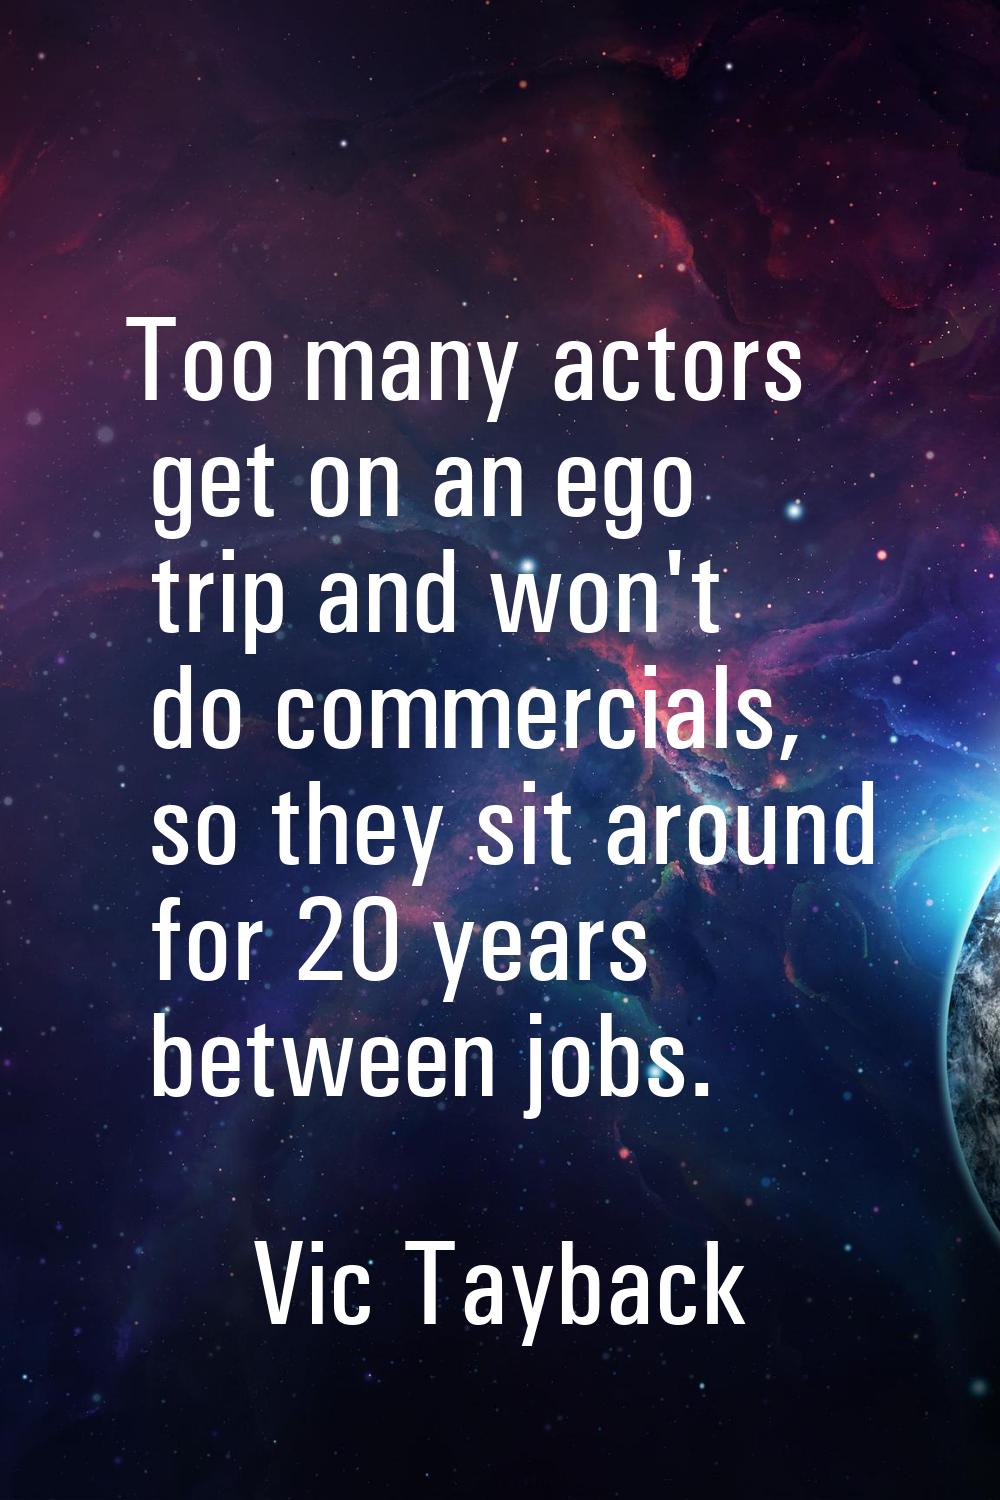 Too many actors get on an ego trip and won't do commercials, so they sit around for 20 years betwee